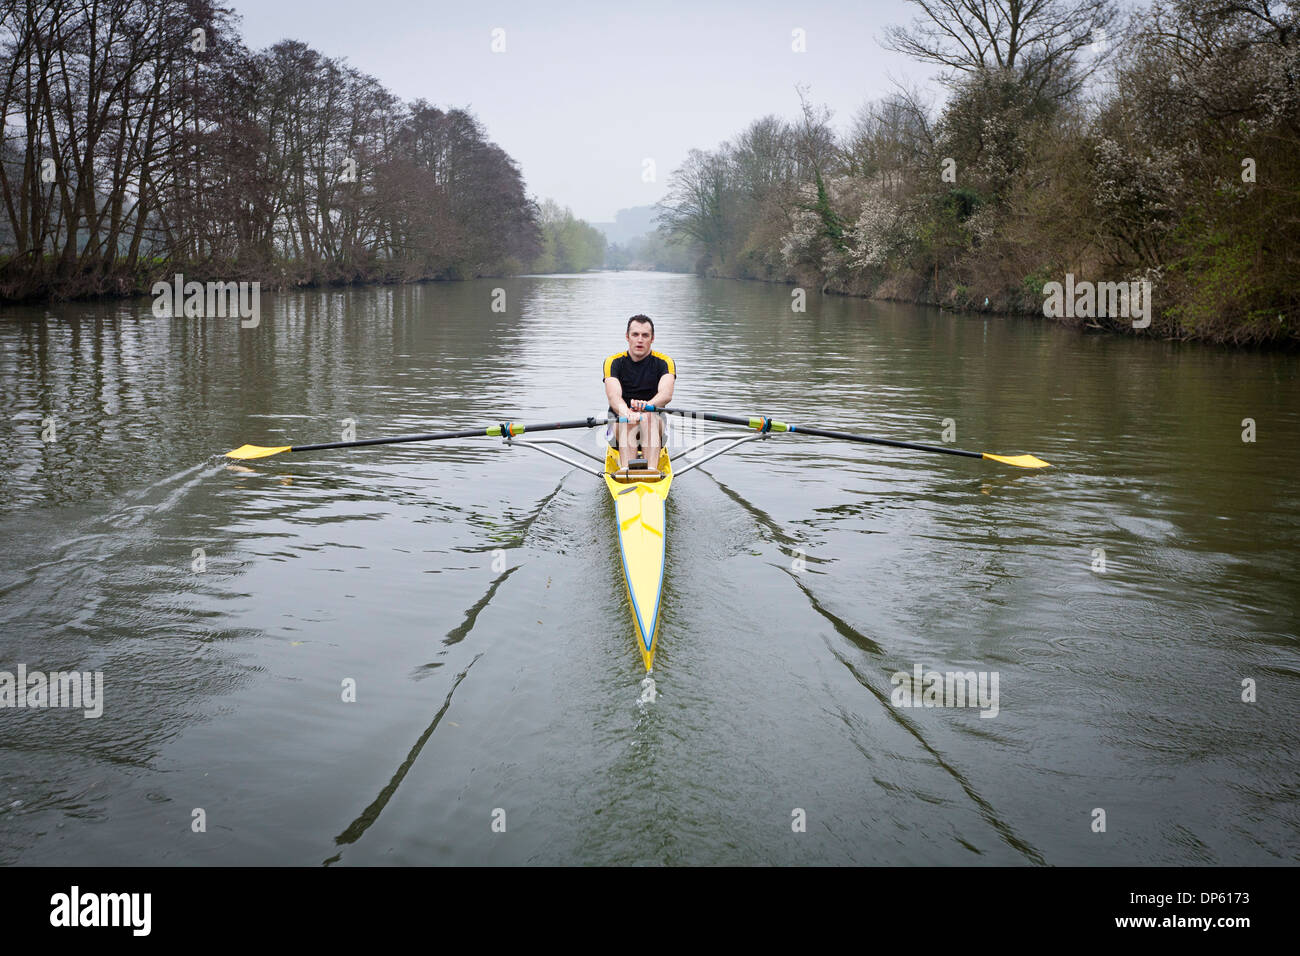 One man in a single scull rowing boat on the river Avon in Bath, UK. Stock Photo